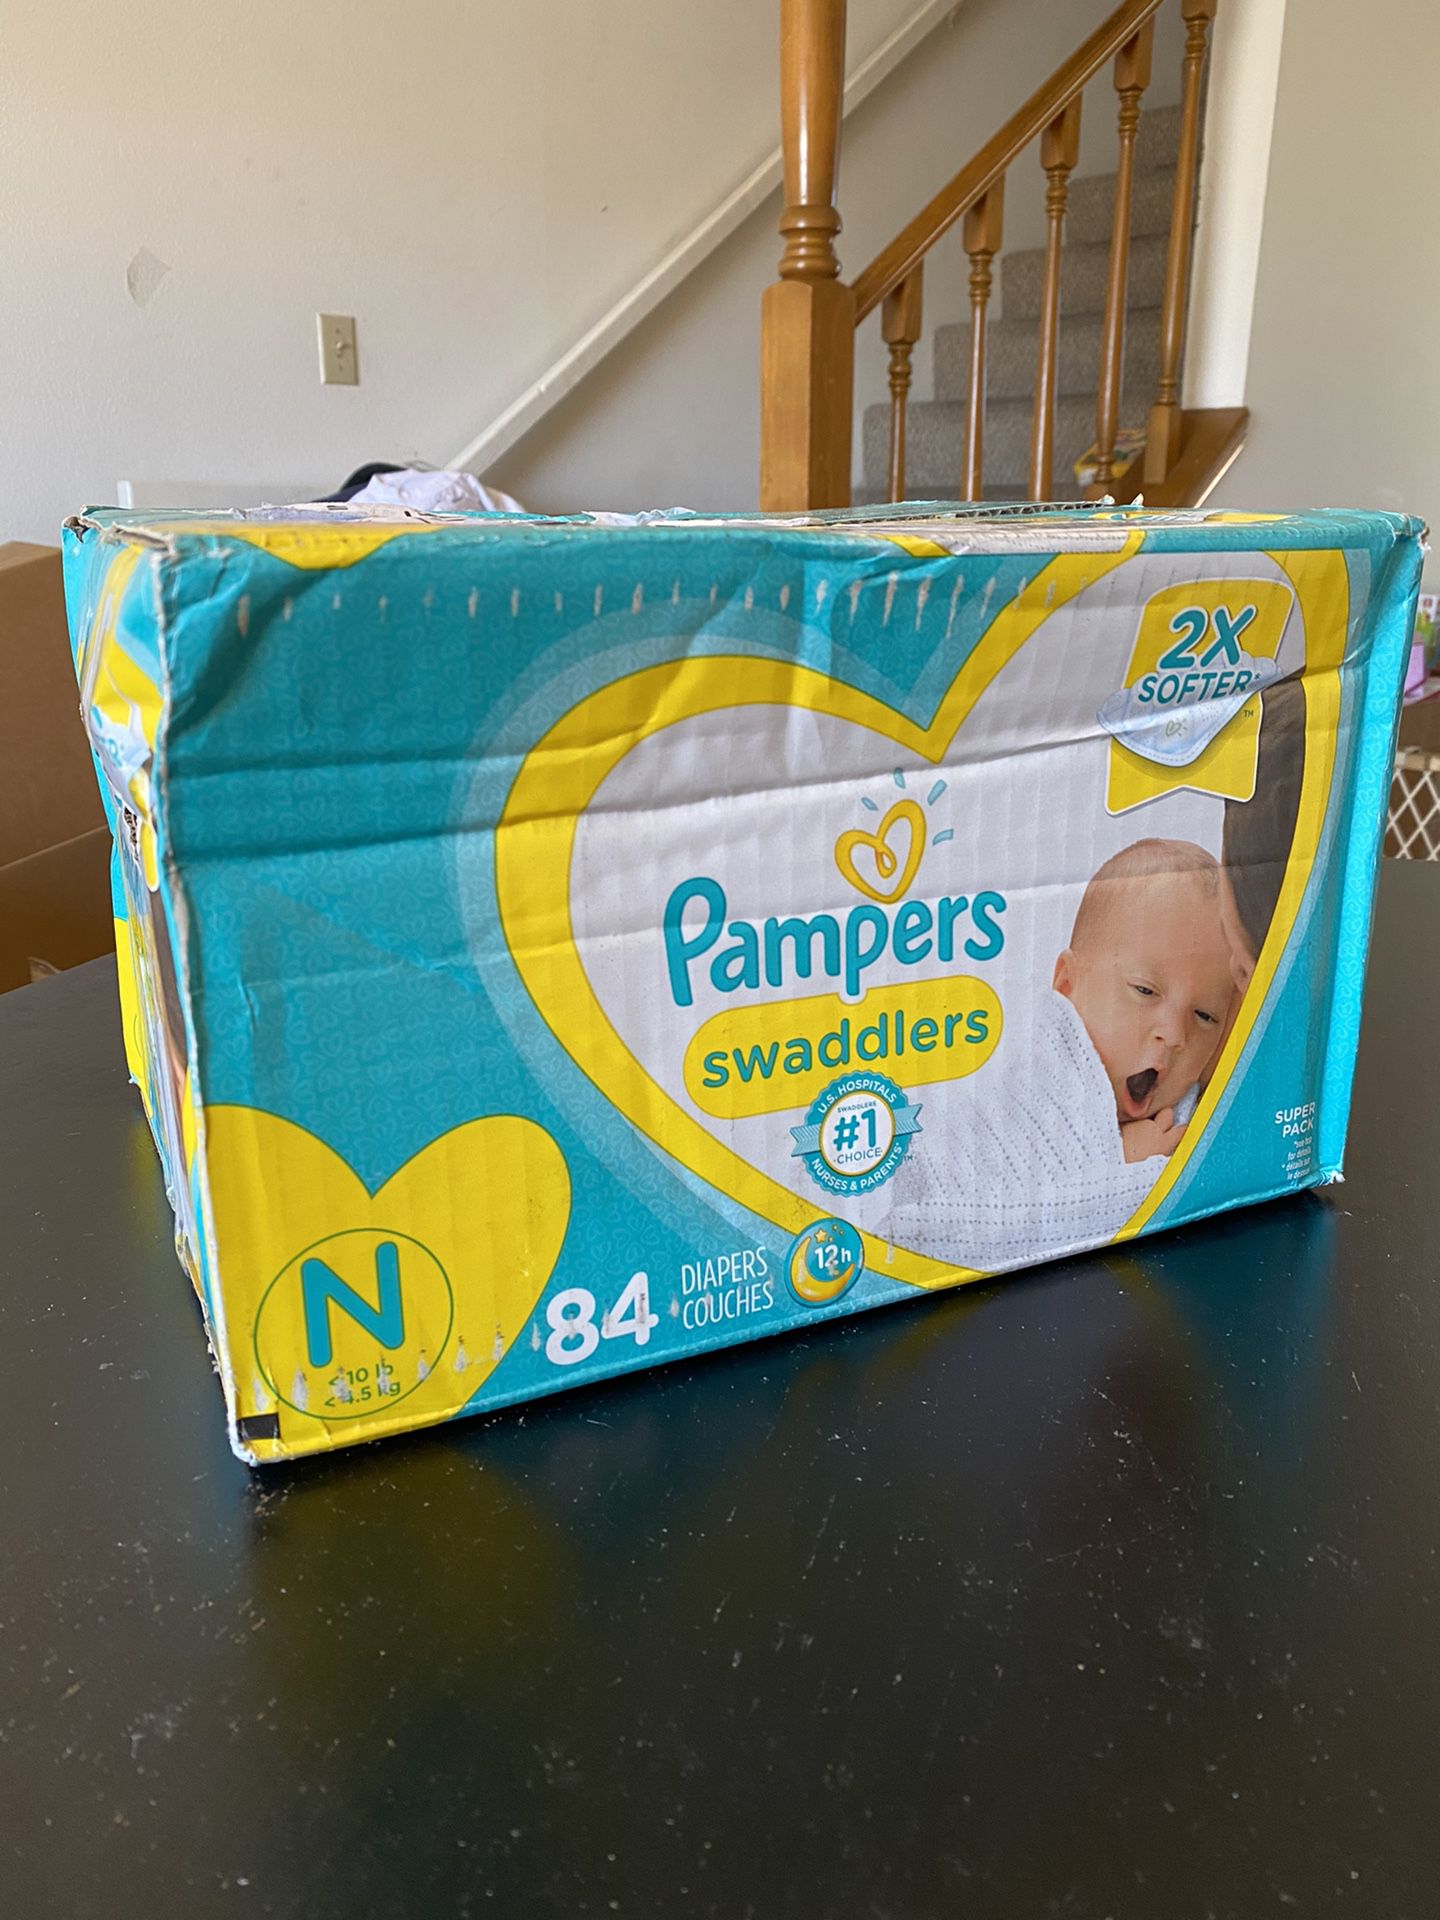 NEW PAMPERS SWADDLERS NEWBORN DIAPERS, 84 COUNT